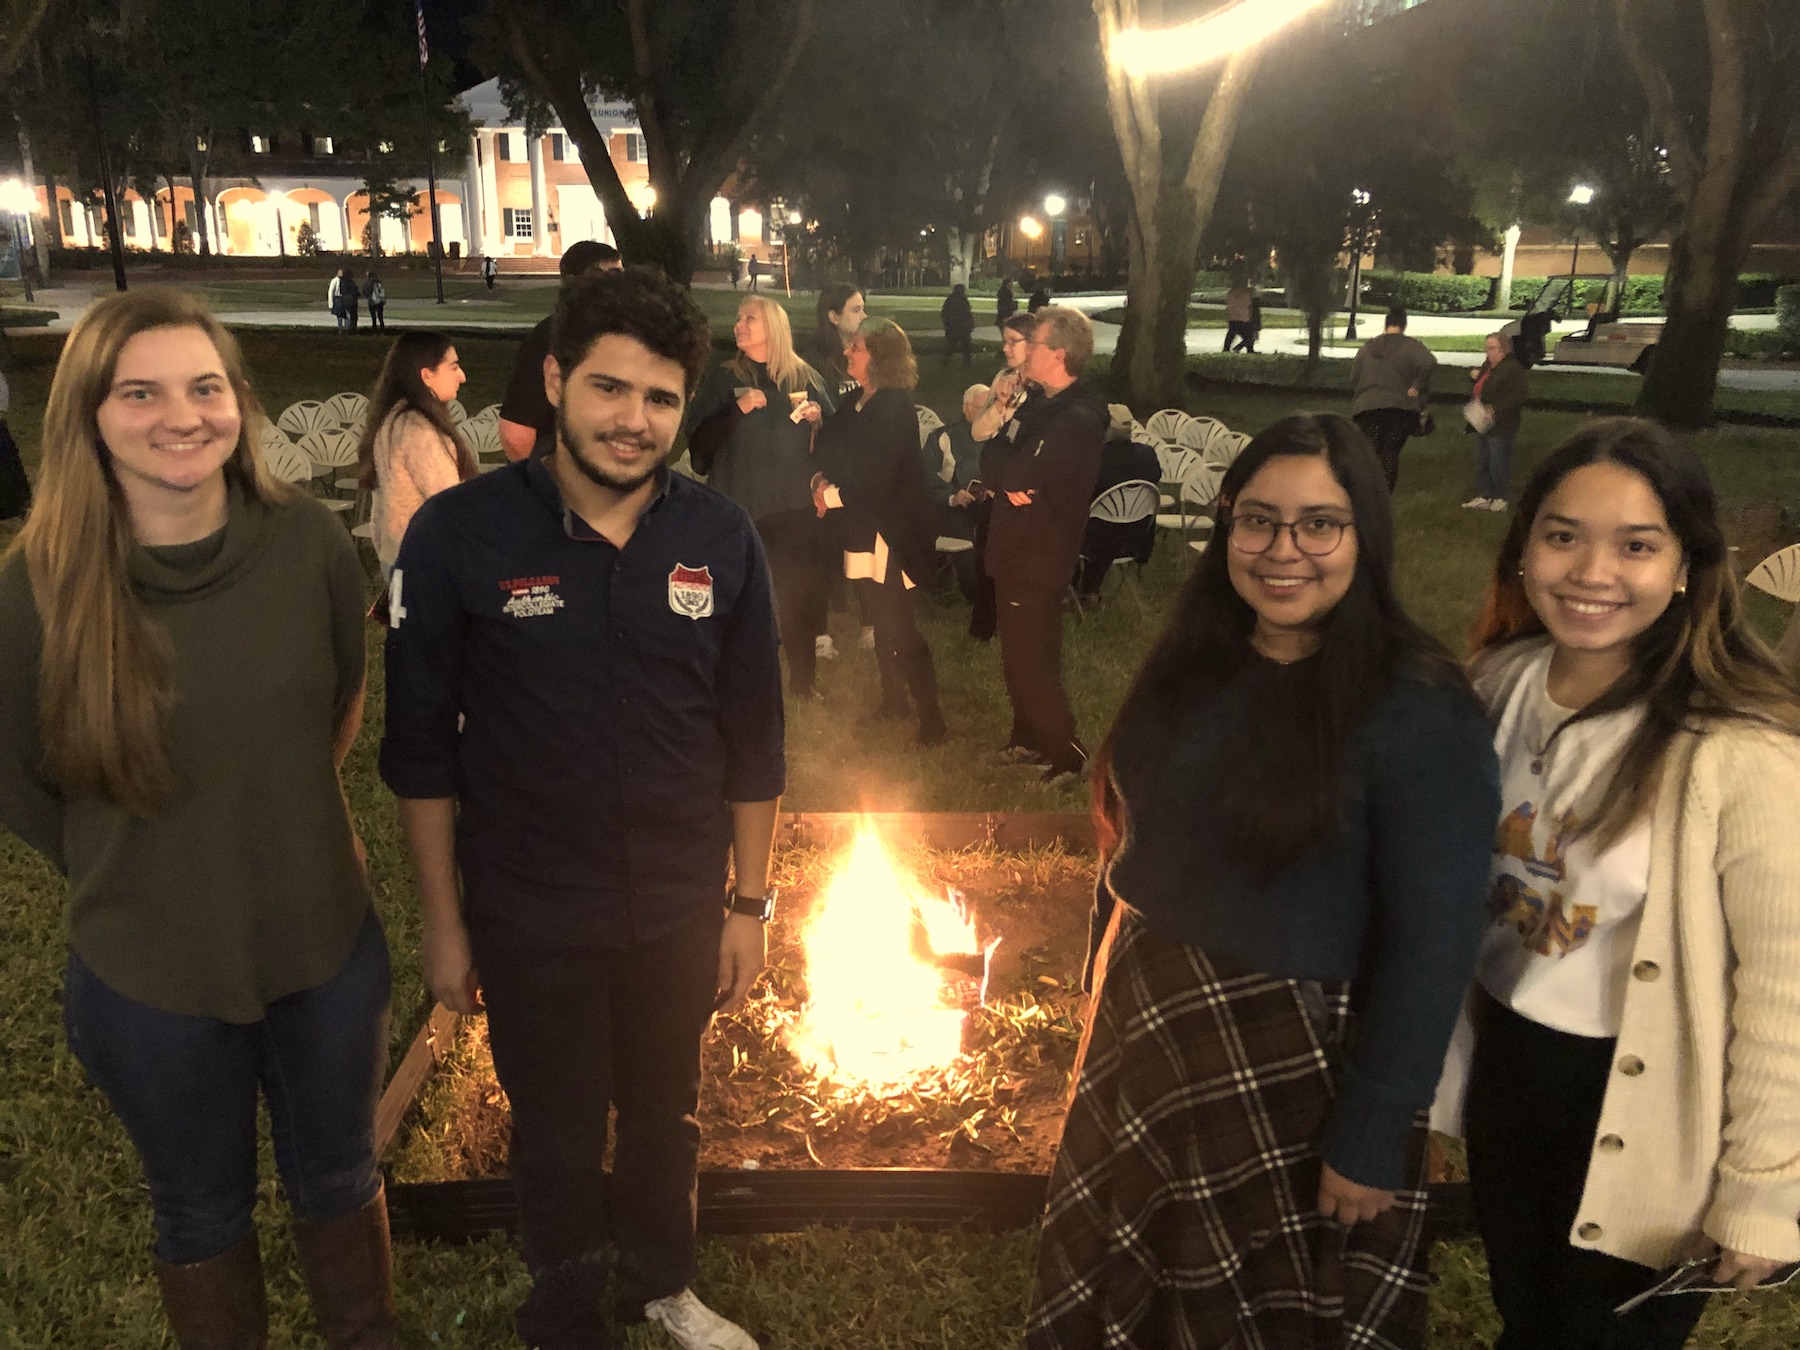 The student speakers pose in front of the roaring Yule Log fire